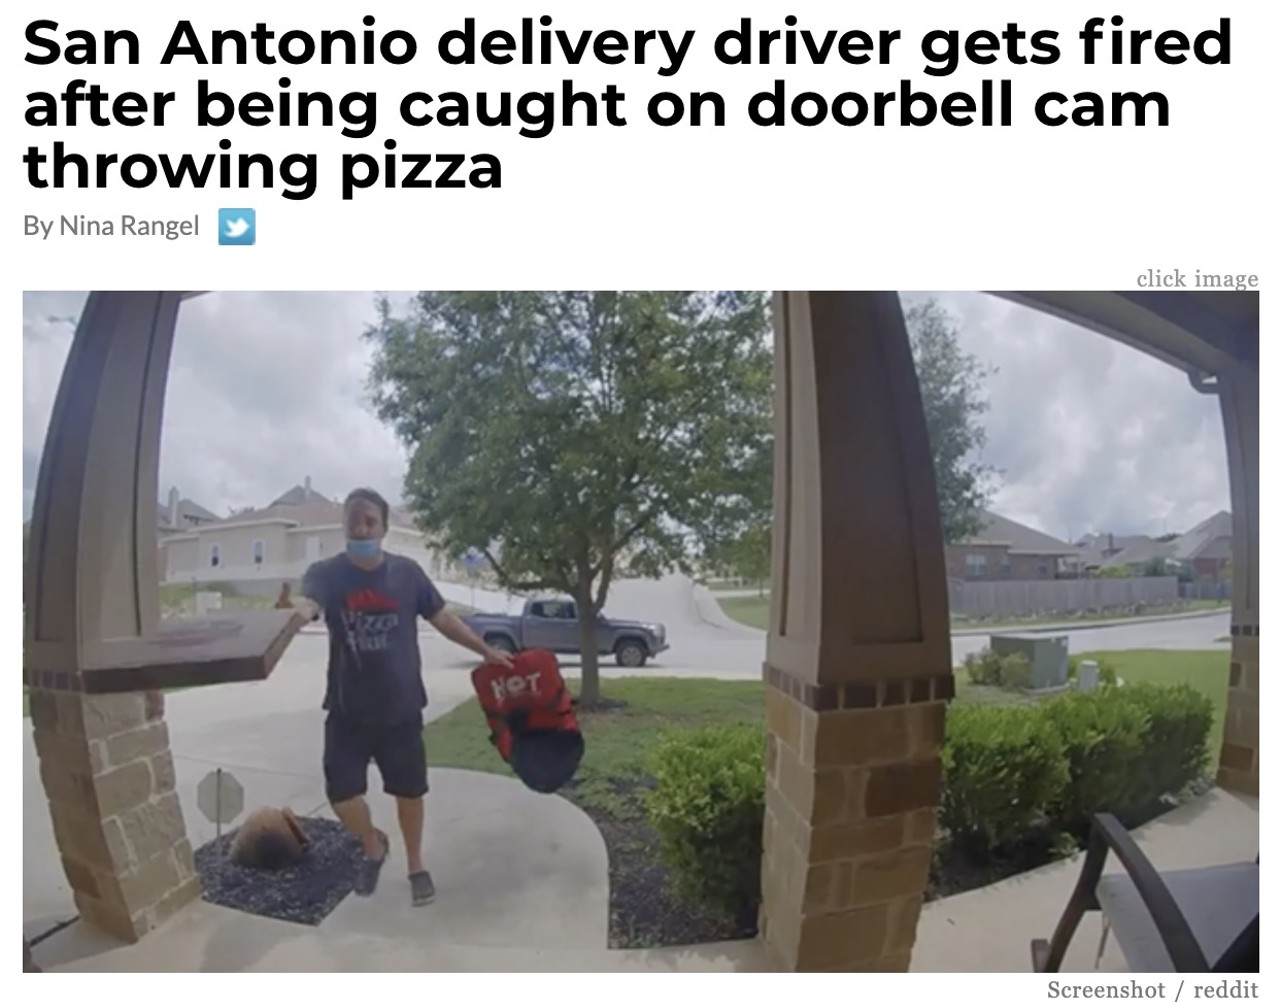 5. San Antonio delivery driver gets fired after being caught on doorbell cam throwing pizza